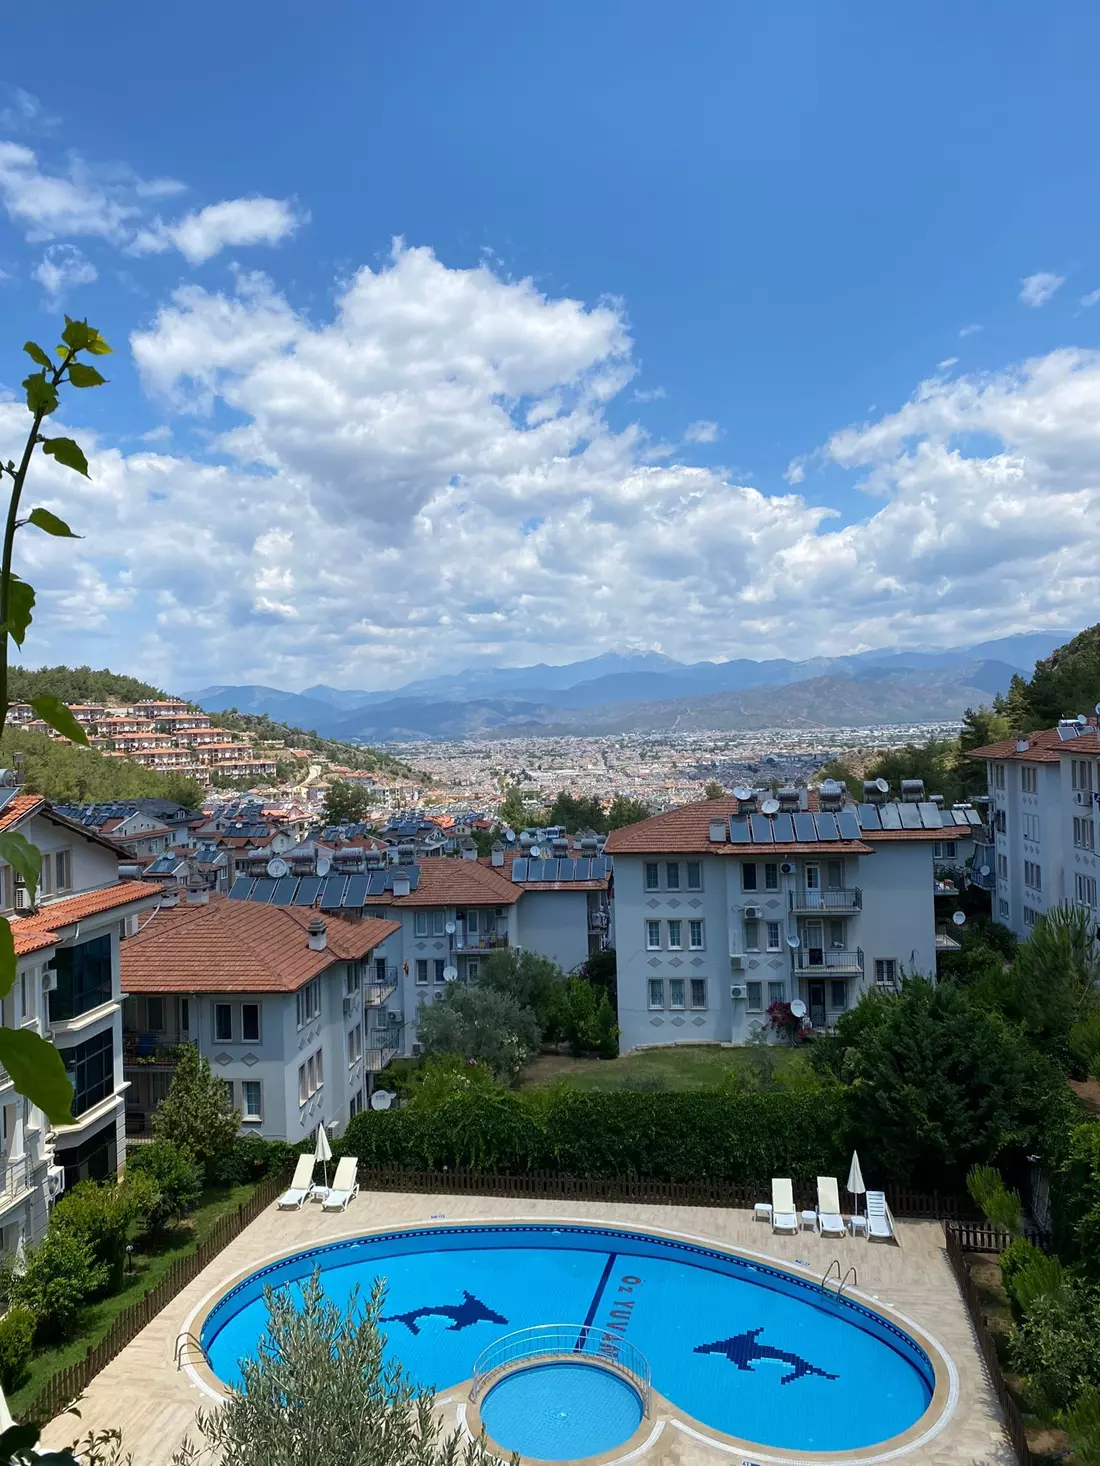 240 m2 Duplex Apartment For Sale With City View In Fethiye Tasyaka